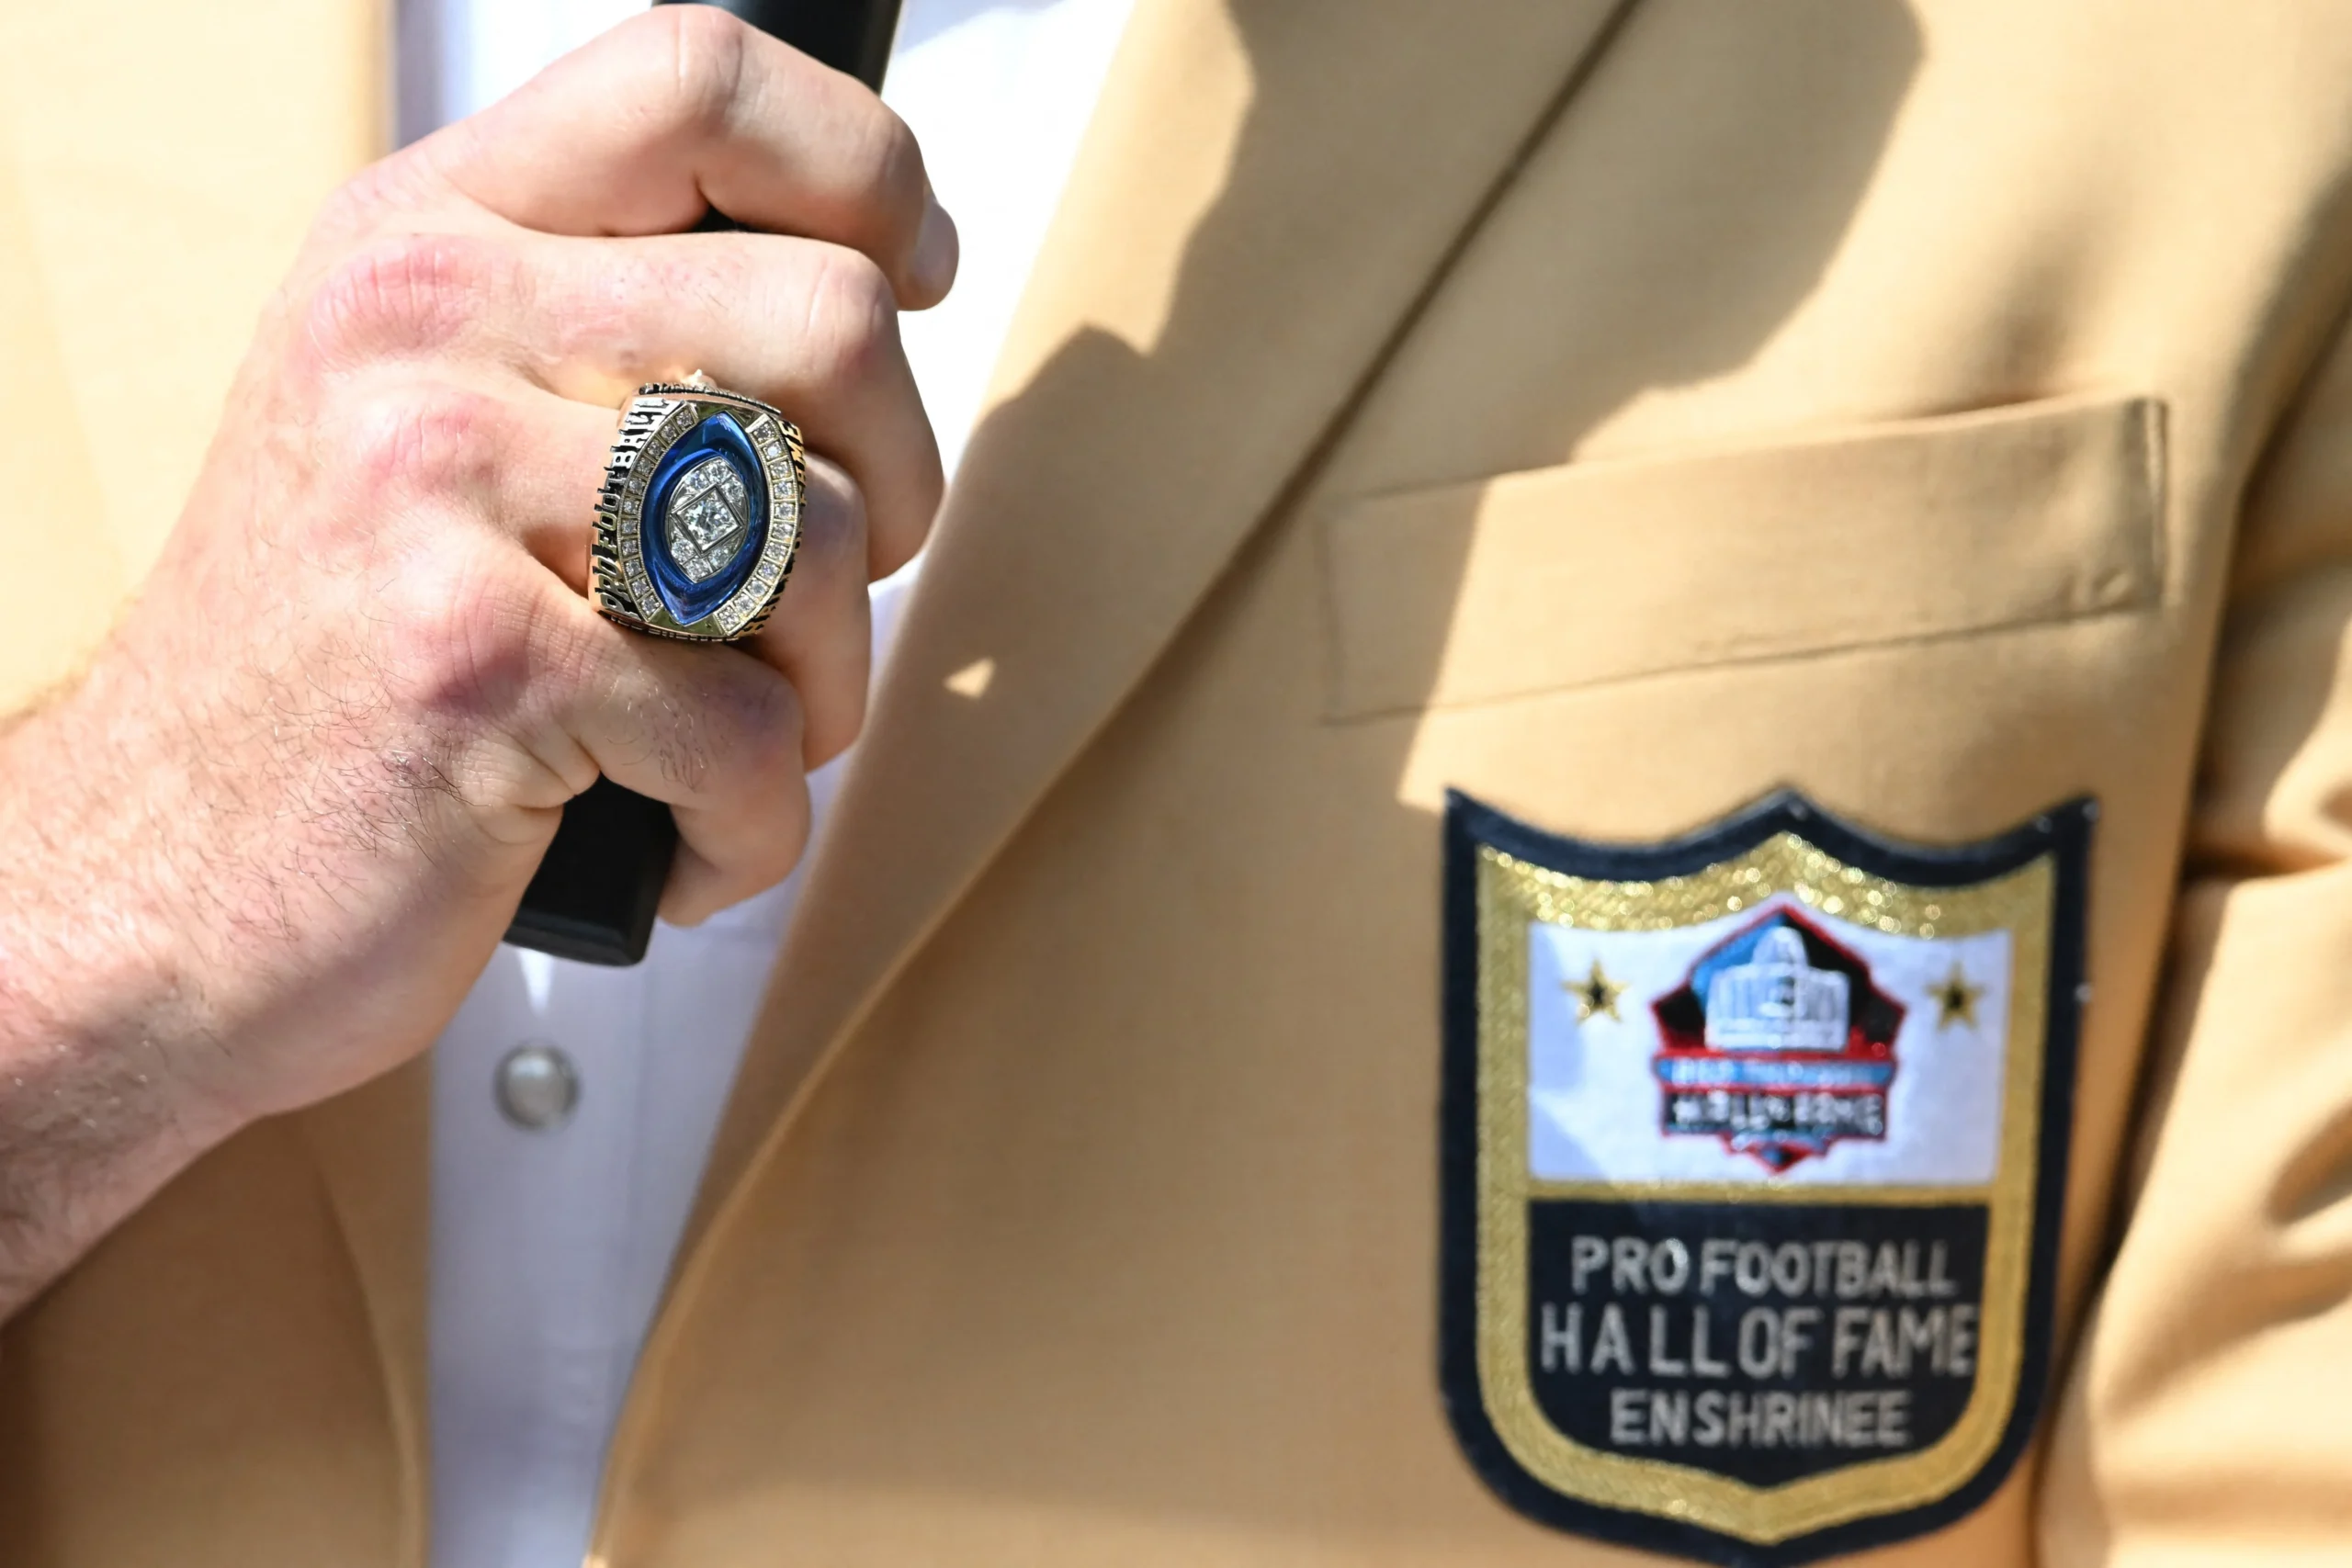 Outside of the Super Bowl, the NFL Hall of Fame is the most coveted honor in all of football.